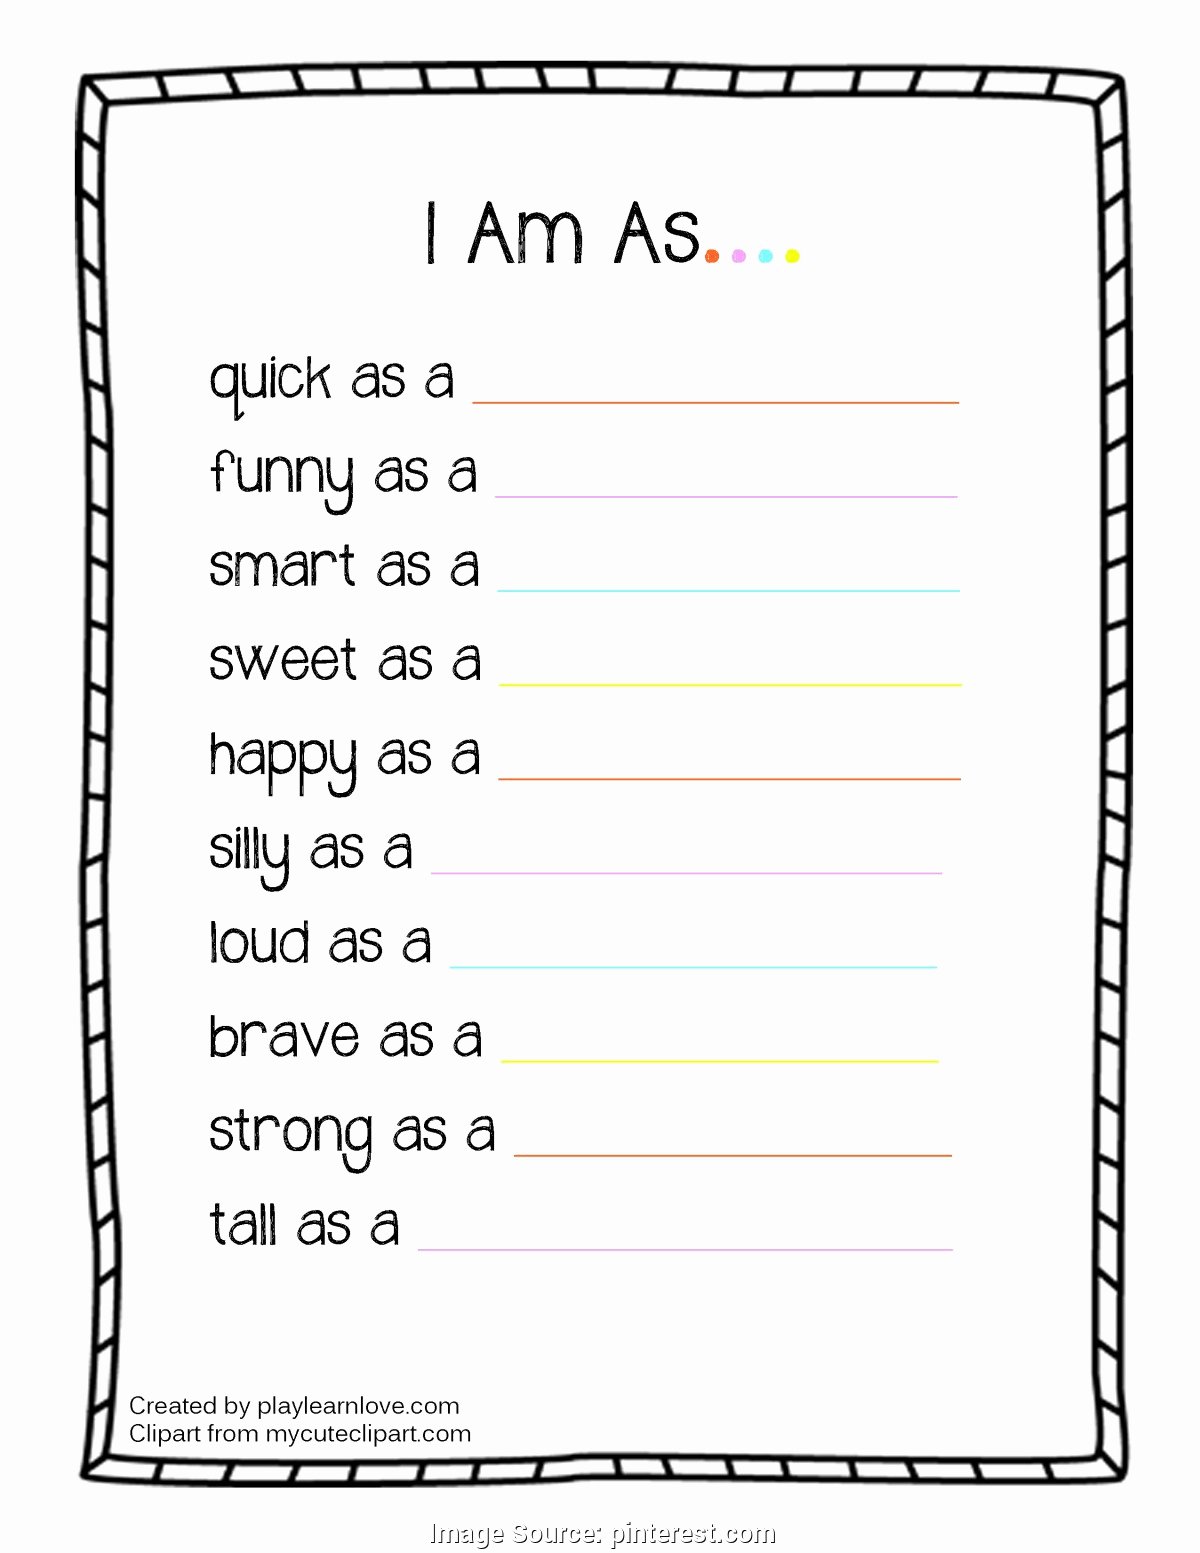 All About Me Worksheet Preschool Luxury All About Me&quot; Body Parts Poem Preschool and toddler